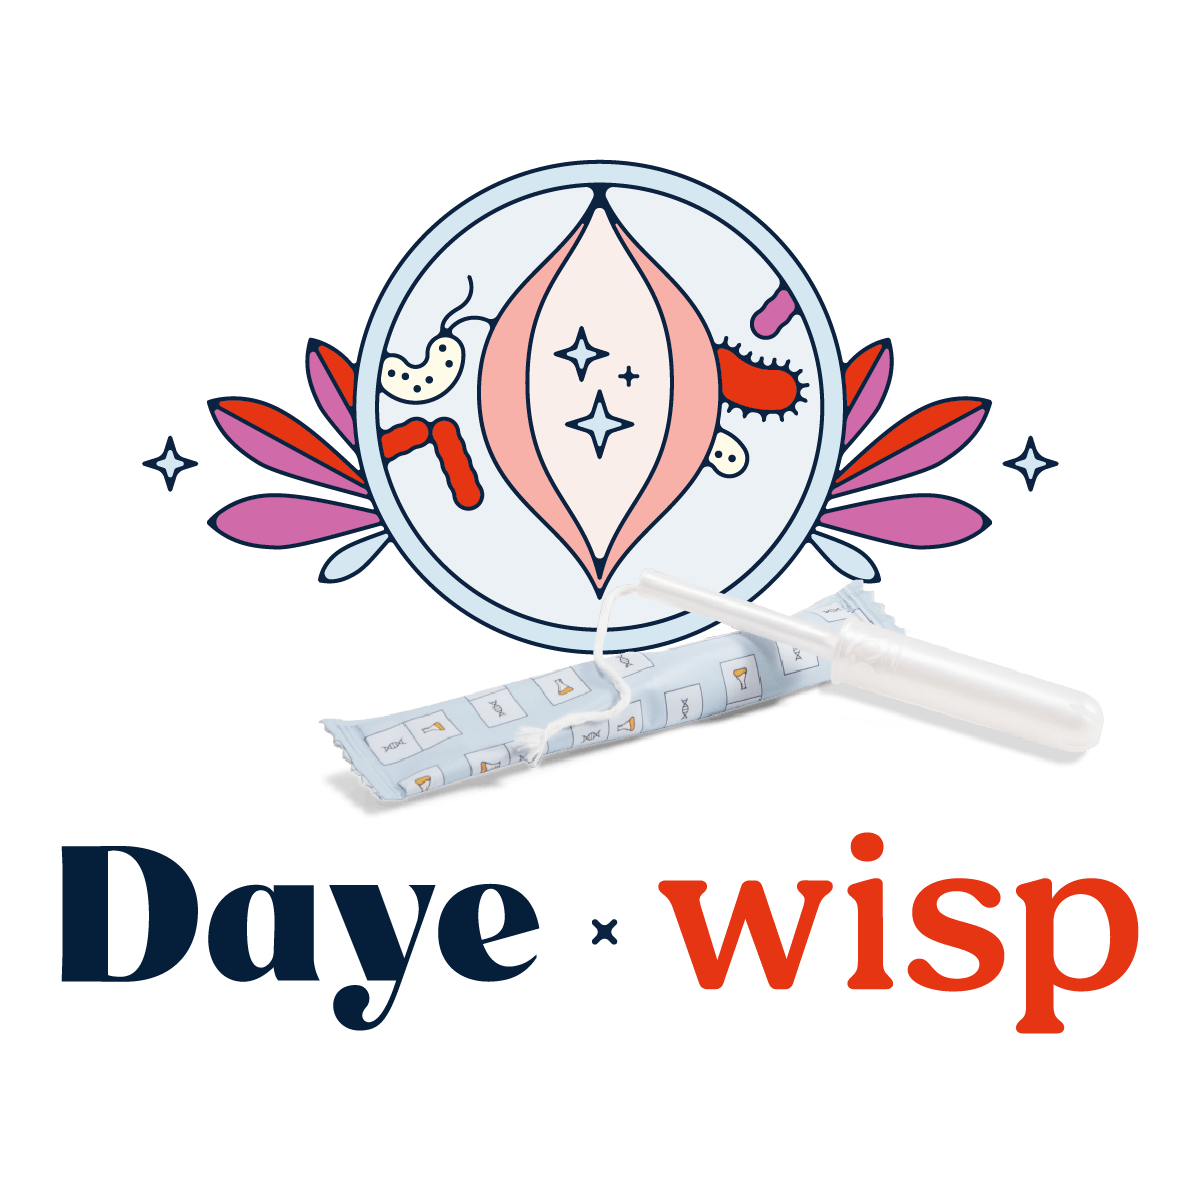 Daye & Wisp: Expanding Vaginal Health Access in the US